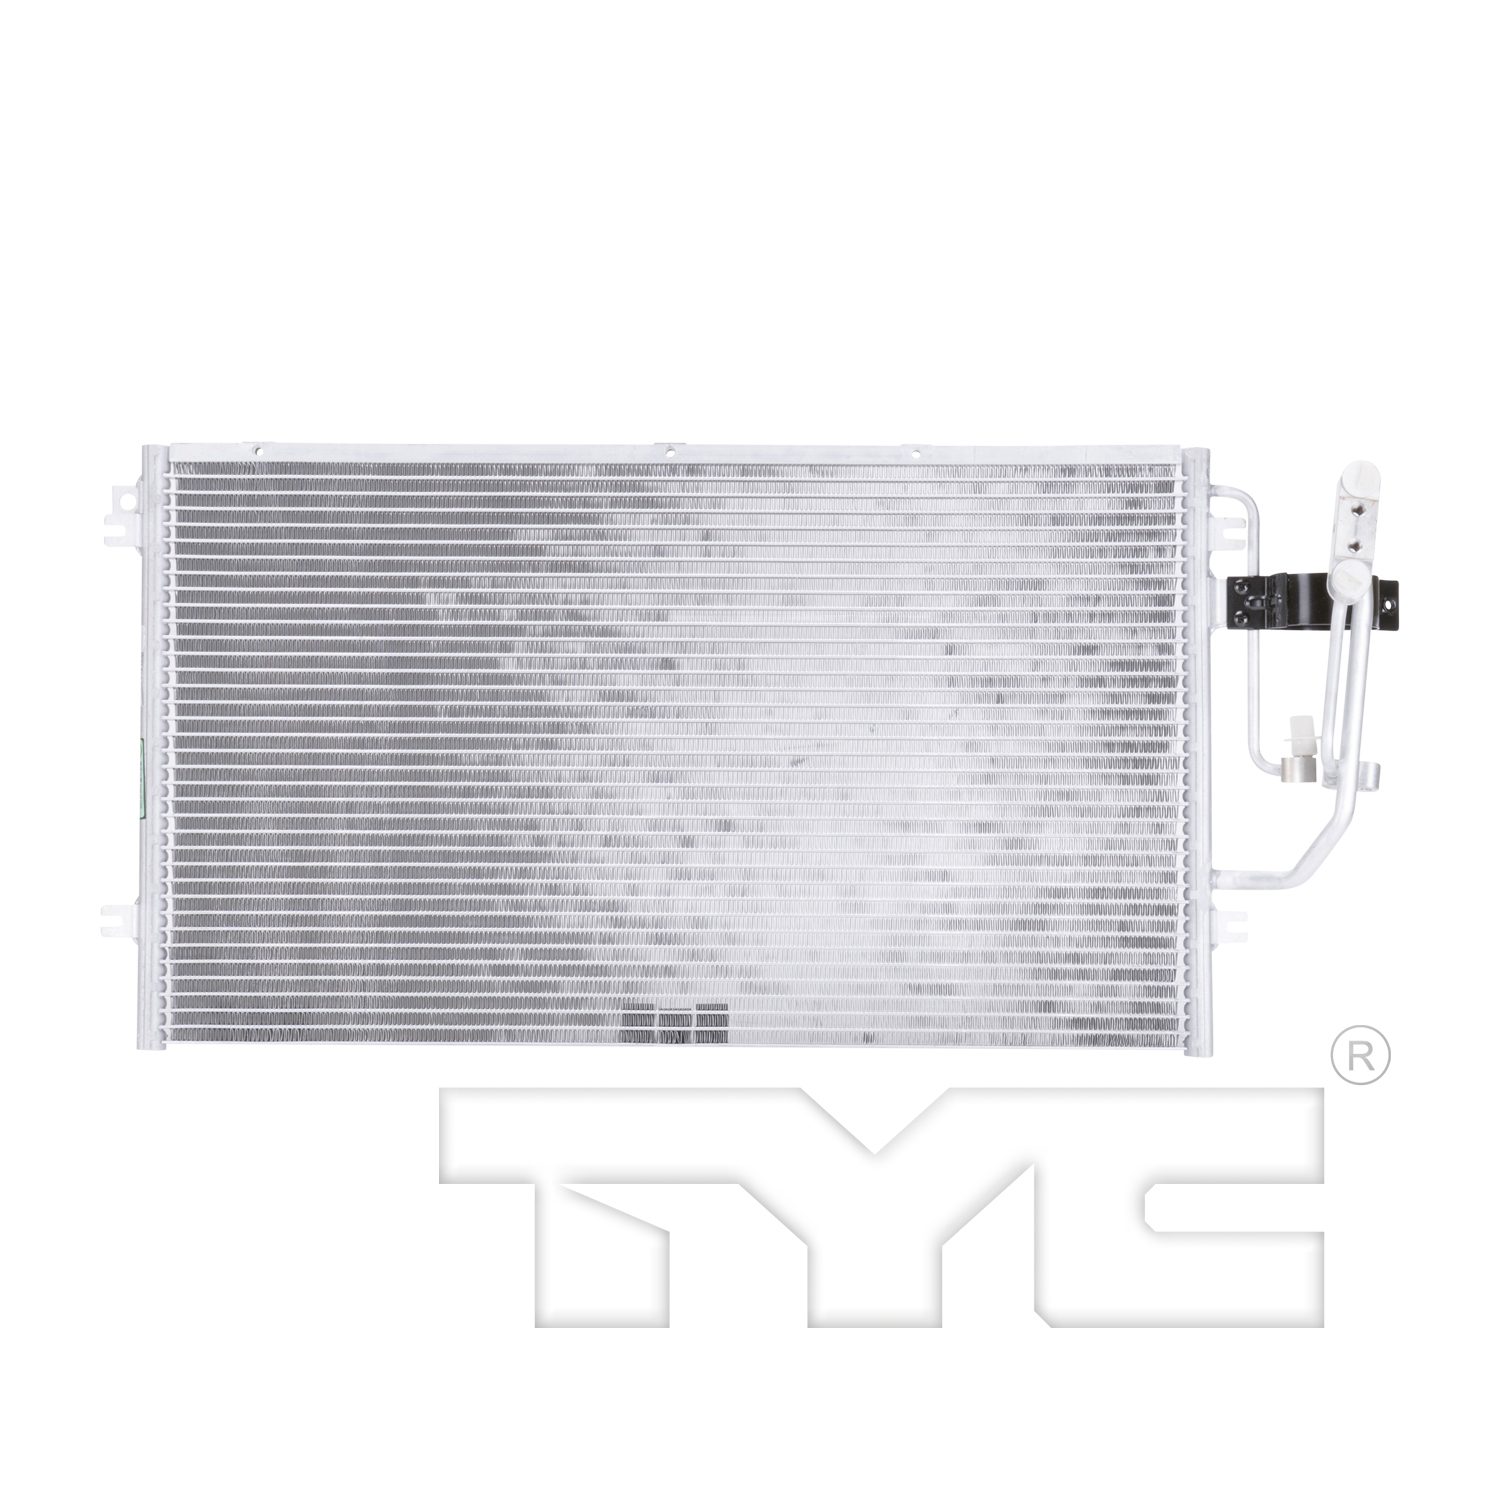 Aftermarket AC CONDENSERS for SATURN - LW1, LW1,00-00,Air conditioning condenser